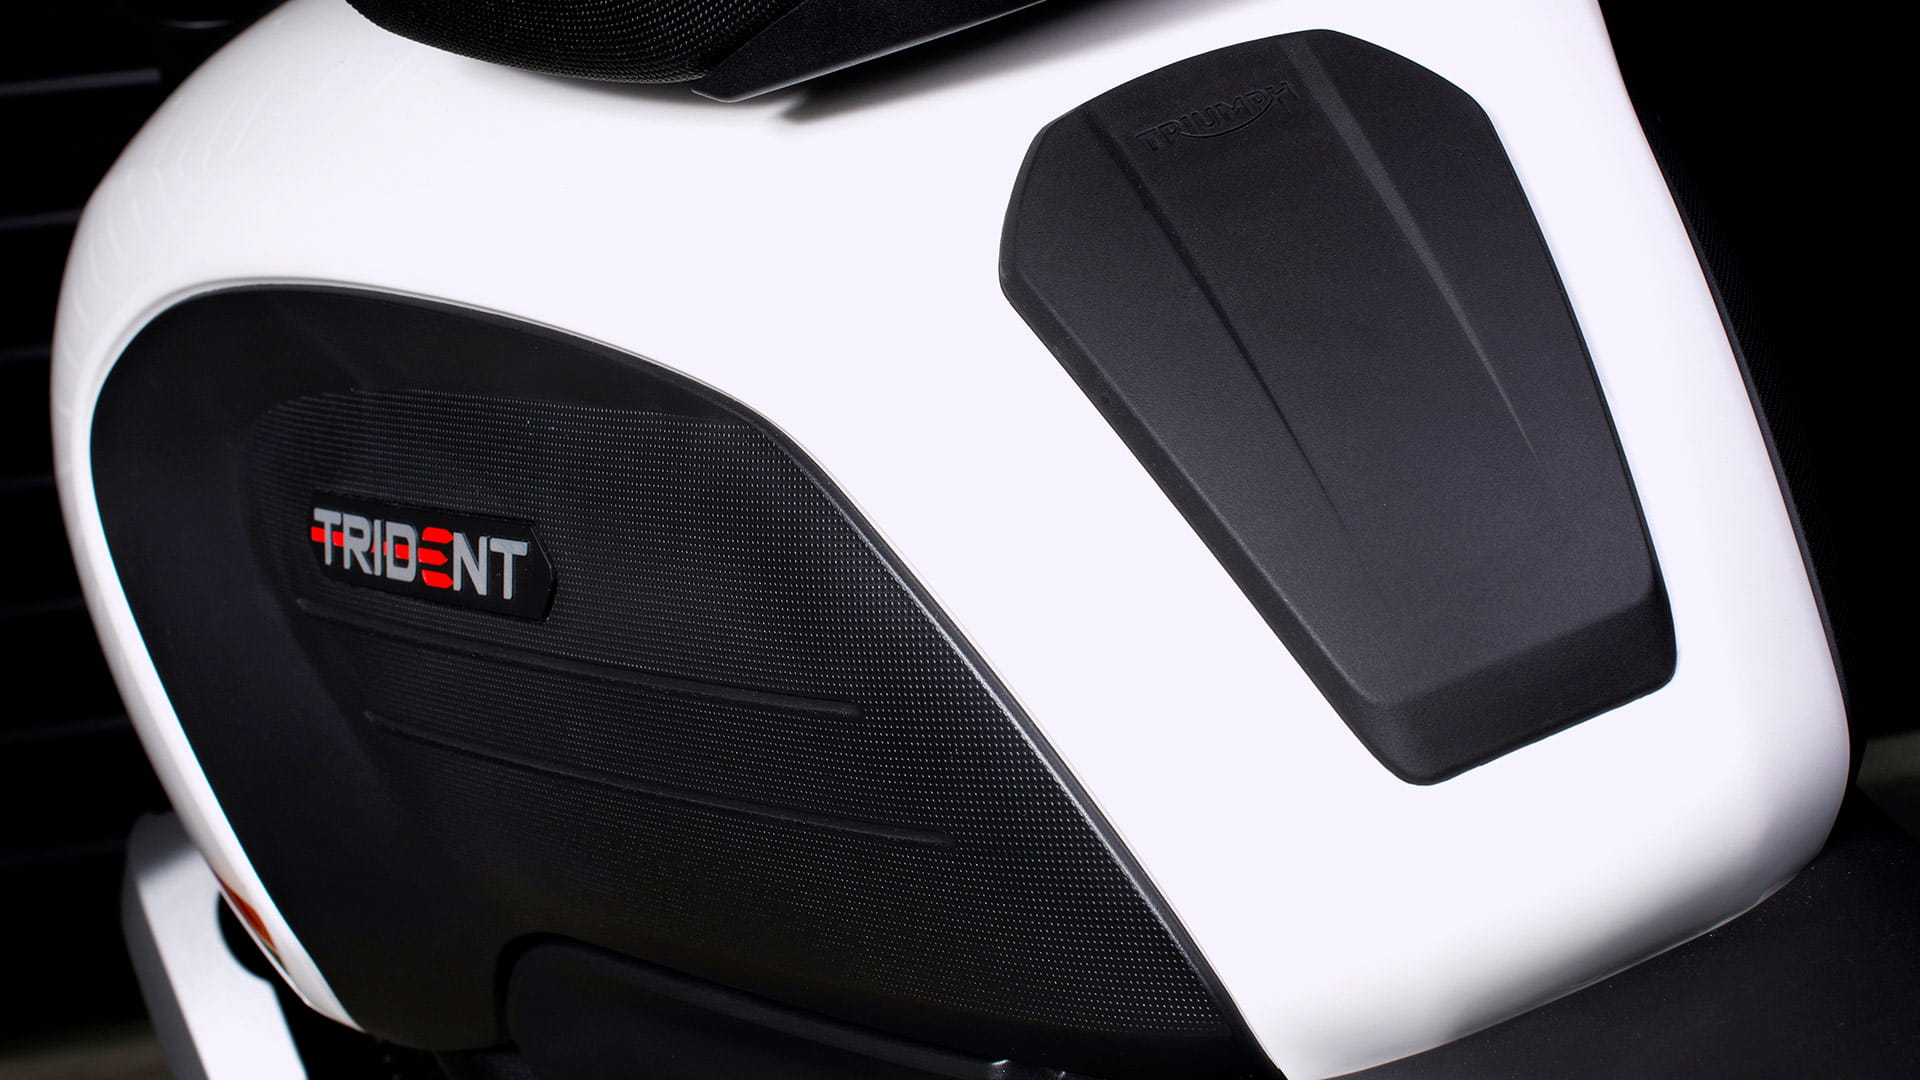 Trident 660 Accessories | For the Ride